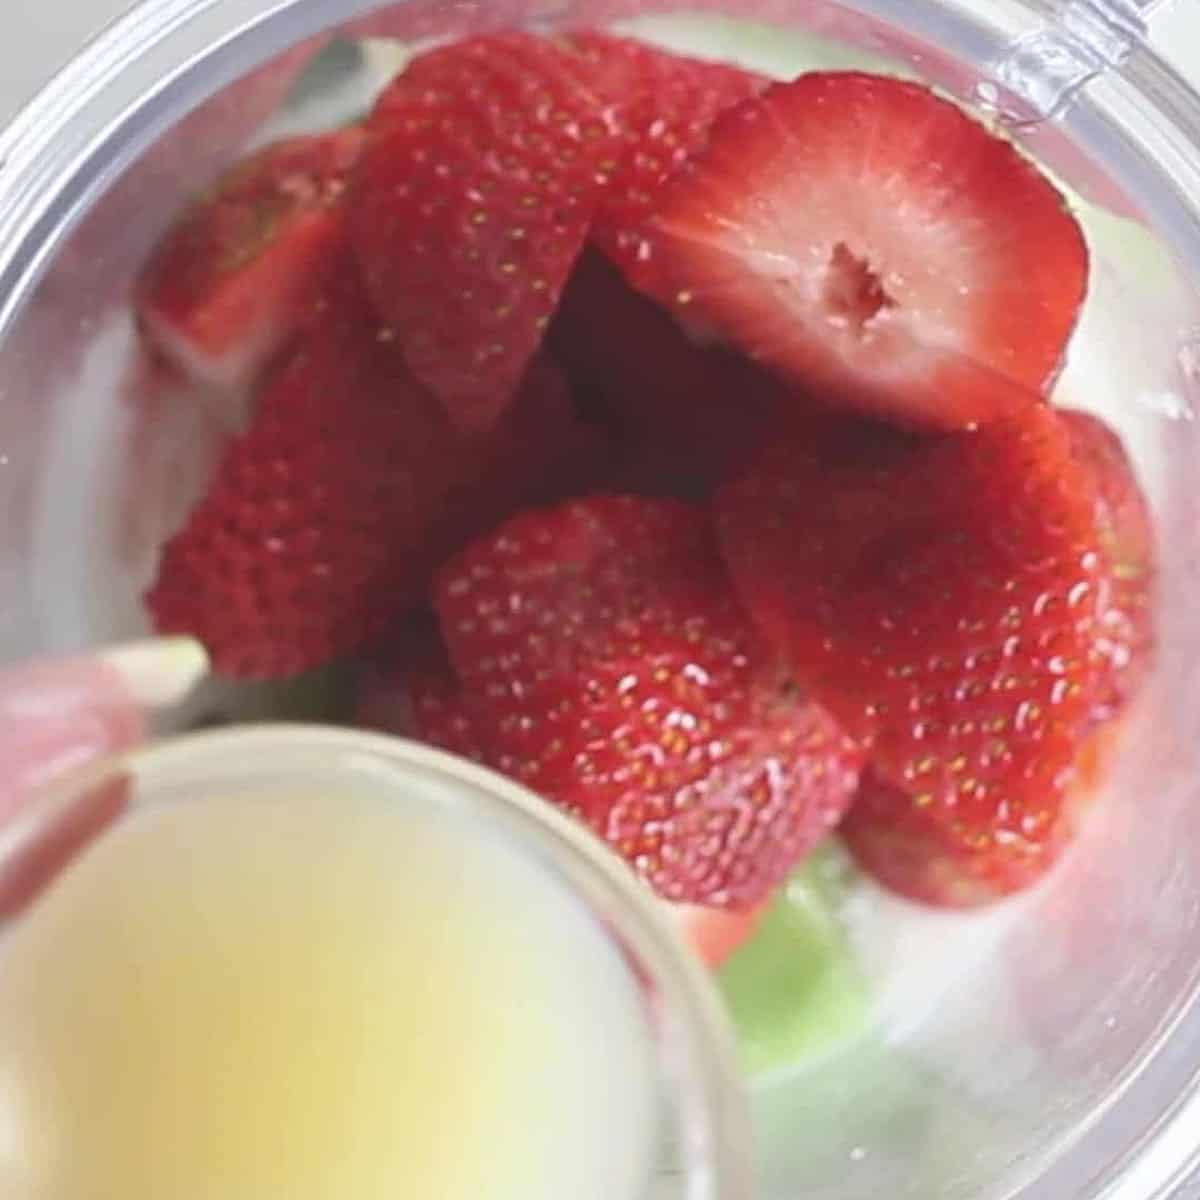 strawberries in a blender and a cup of lemon juice.